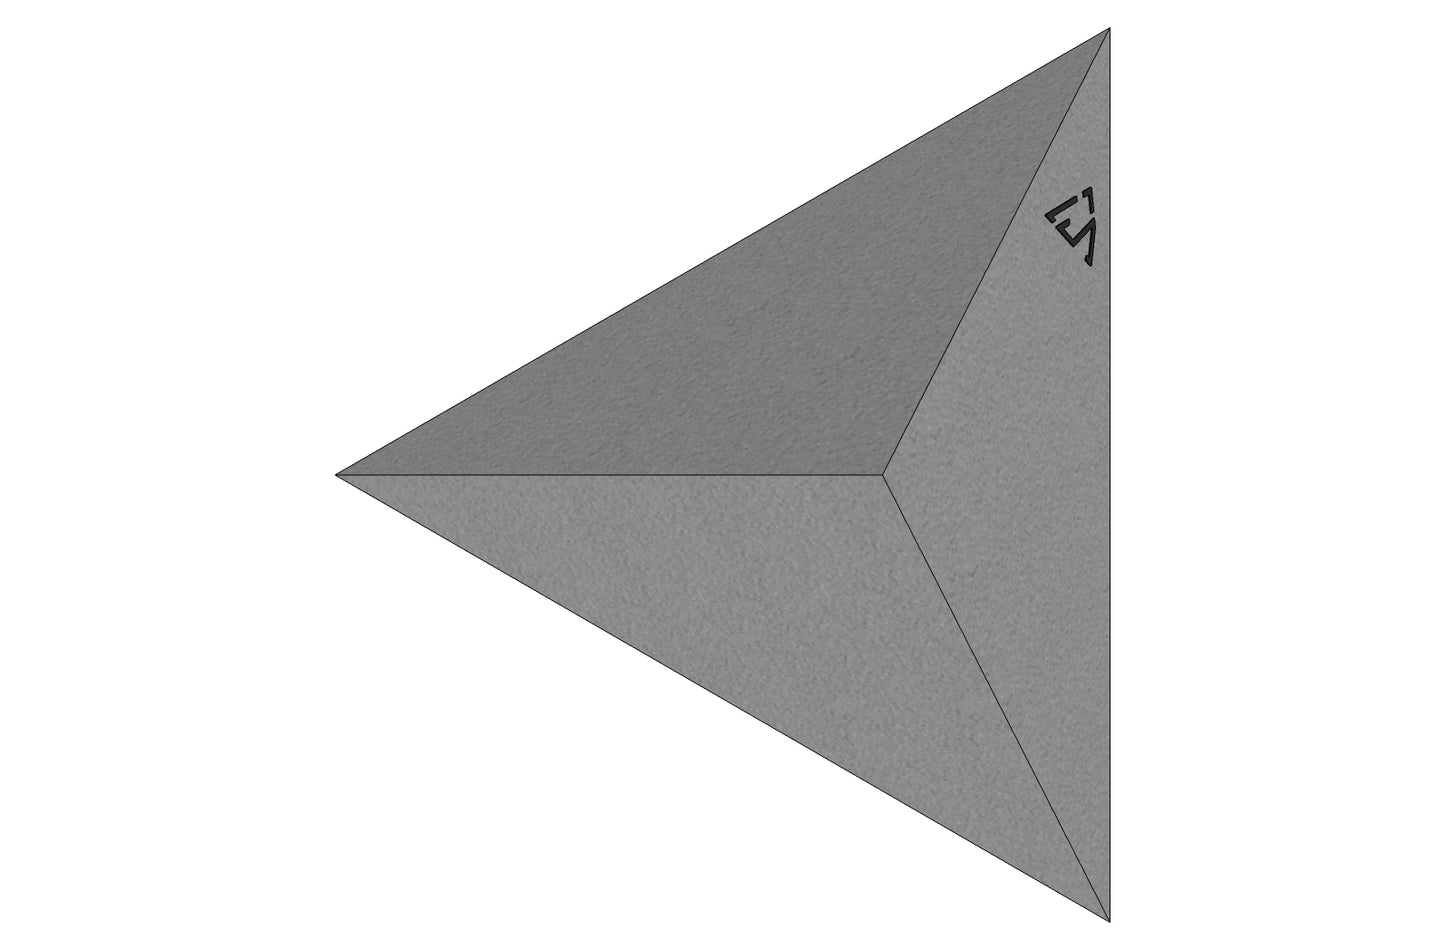 Equilateral Triangle High